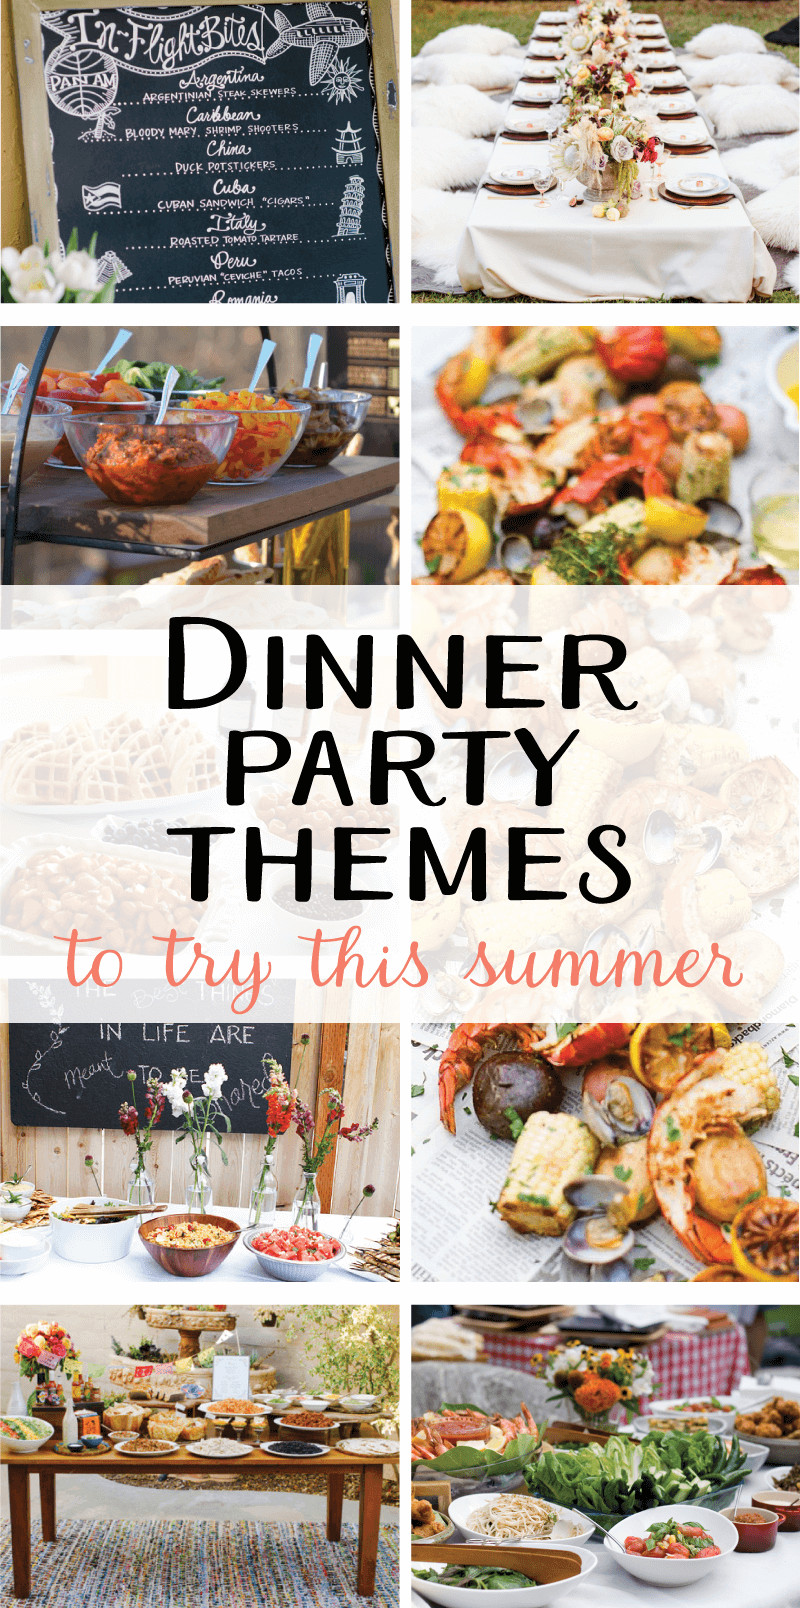 Christmas Dinner Party Theme Ideas
 9 Creative Dinner Party Themes to Try this Summer on Love